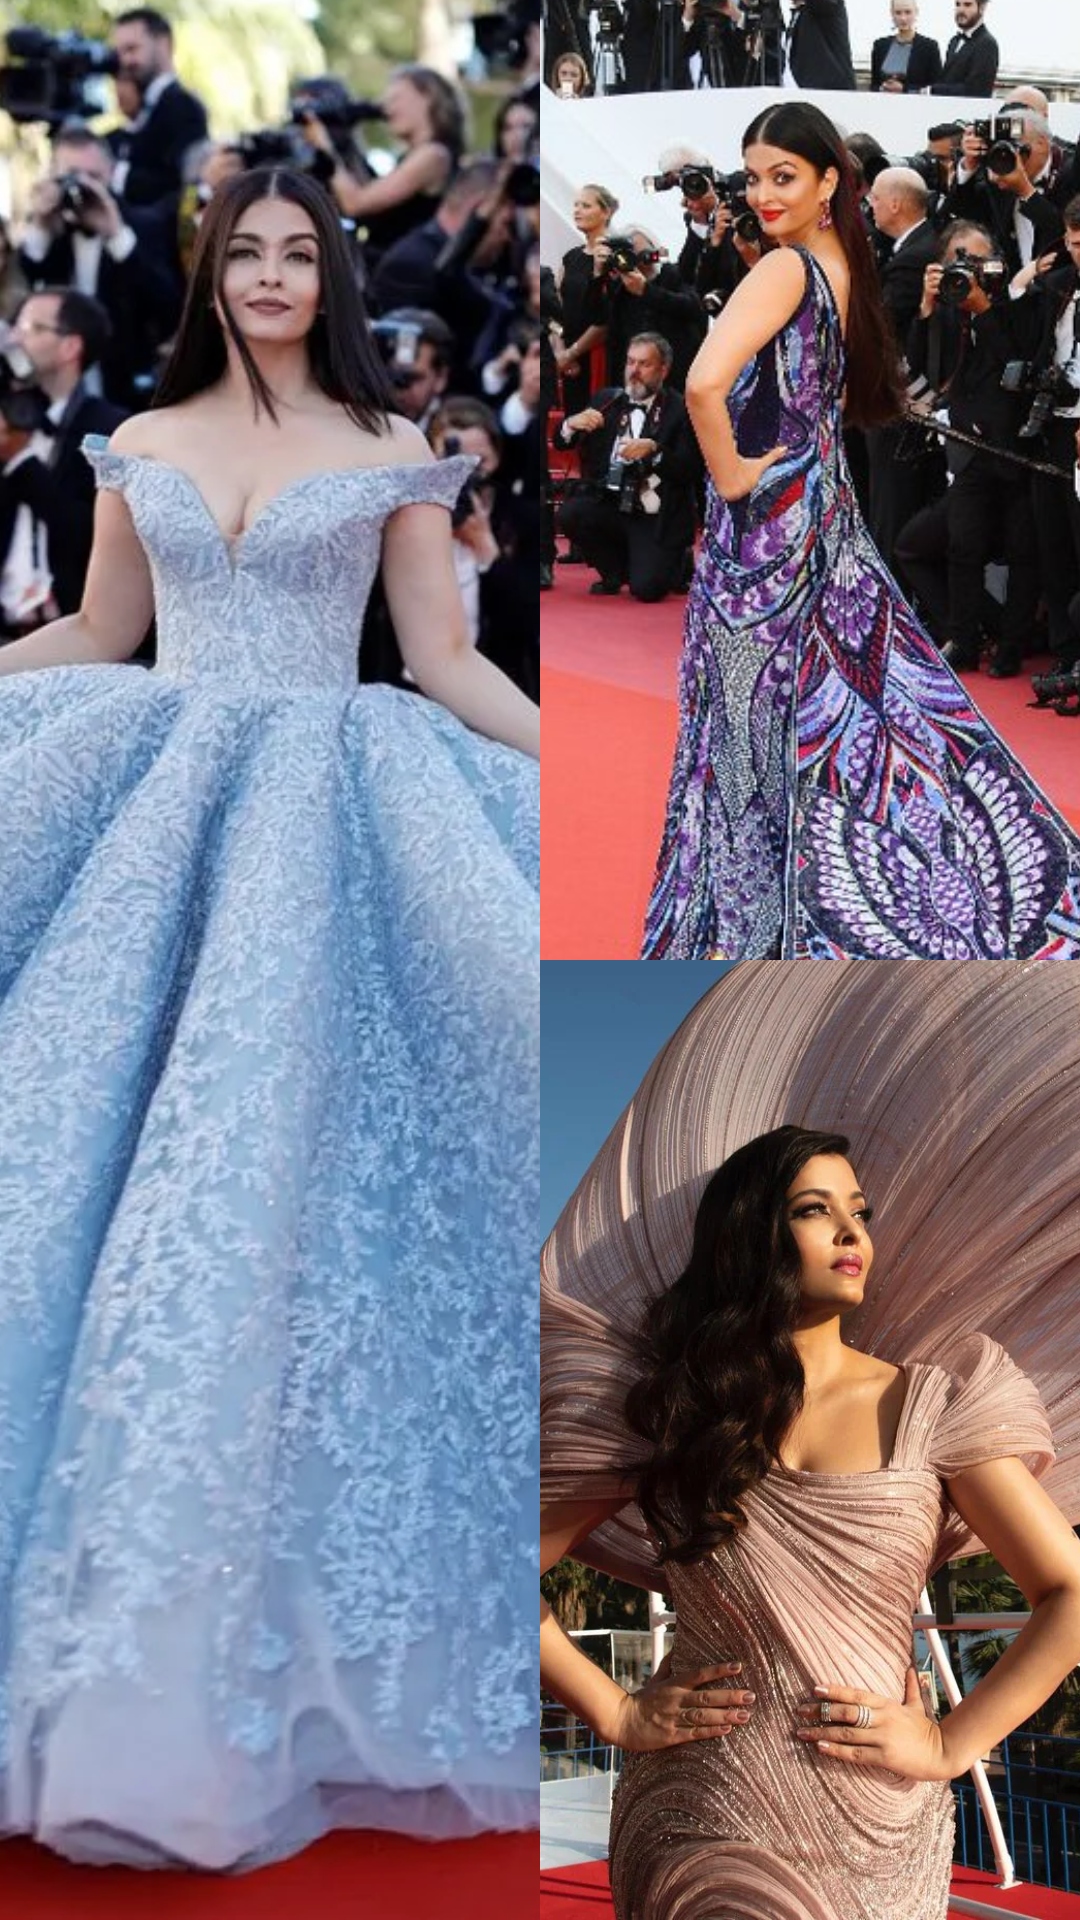 Aishwarya Rai Bachchan Steps Out In Butterfly Gown At Cannes Film Festival